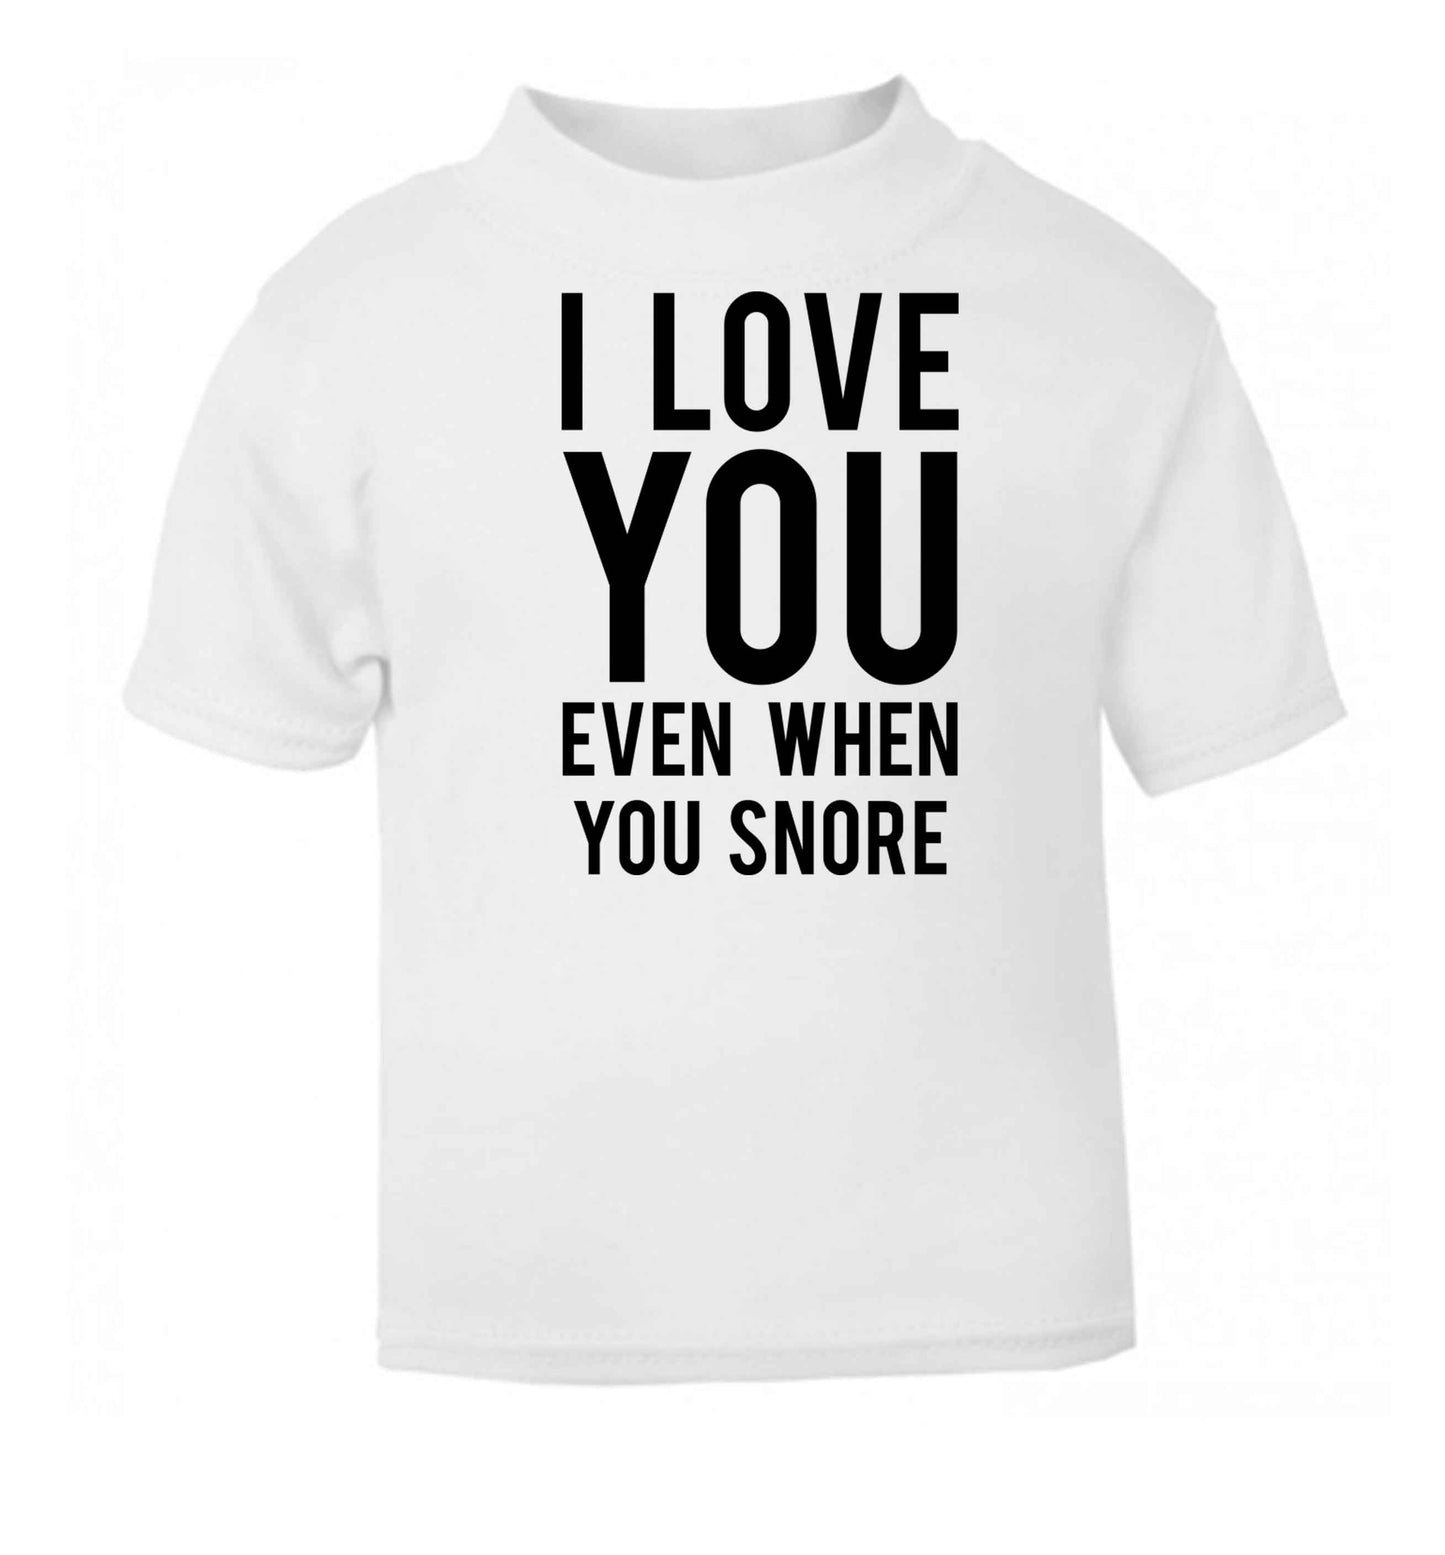 I love you even when you snore white baby toddler Tshirt 2 Years